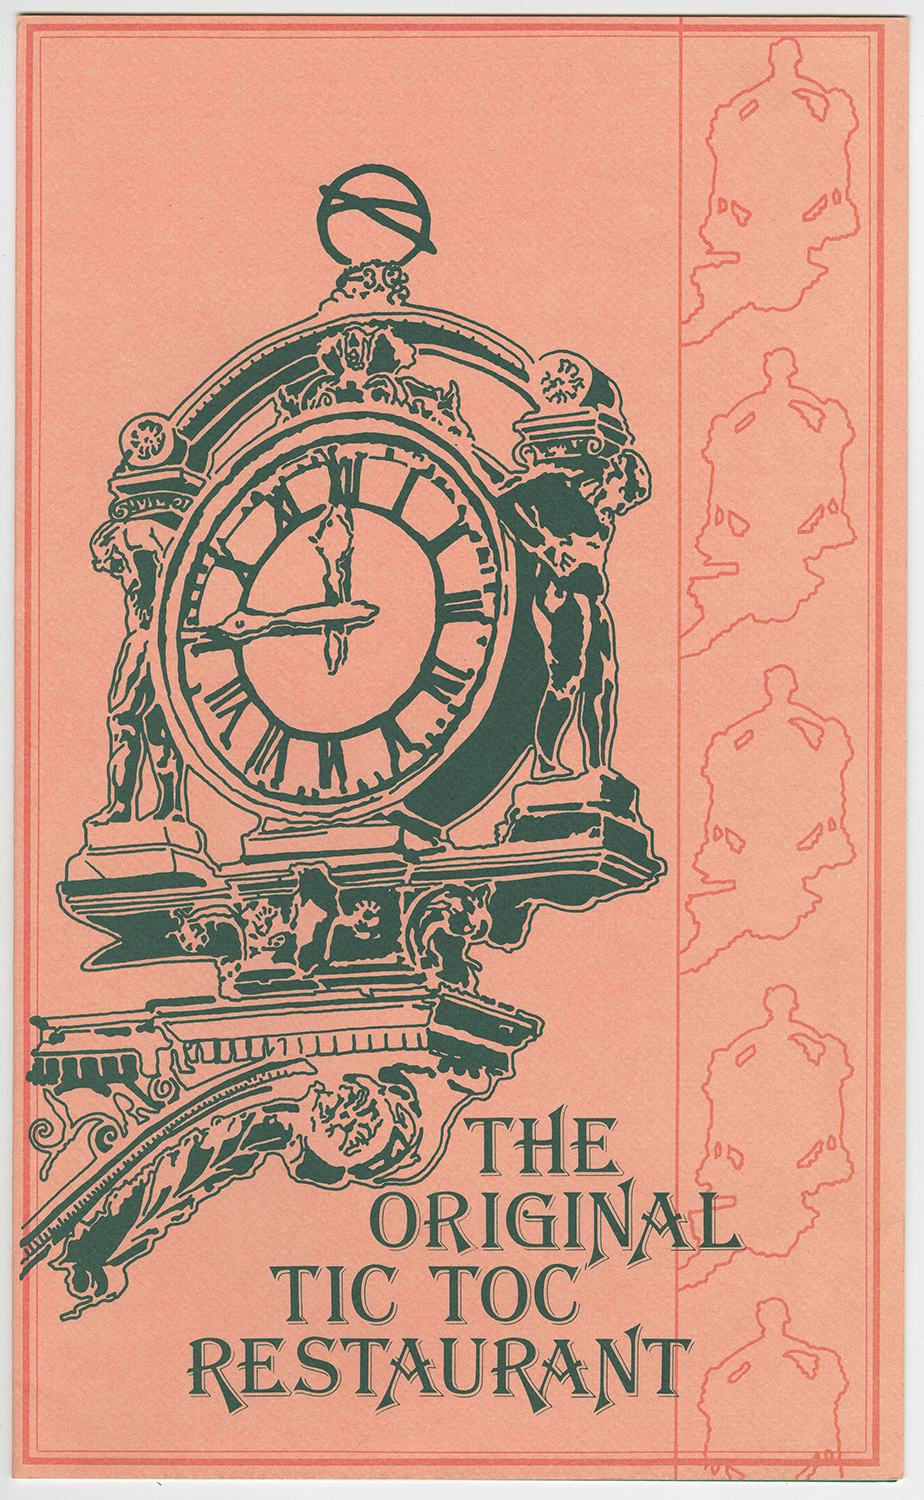 The front page of the Tic Toc Restaurant menu, Kaufmann's Department Store.